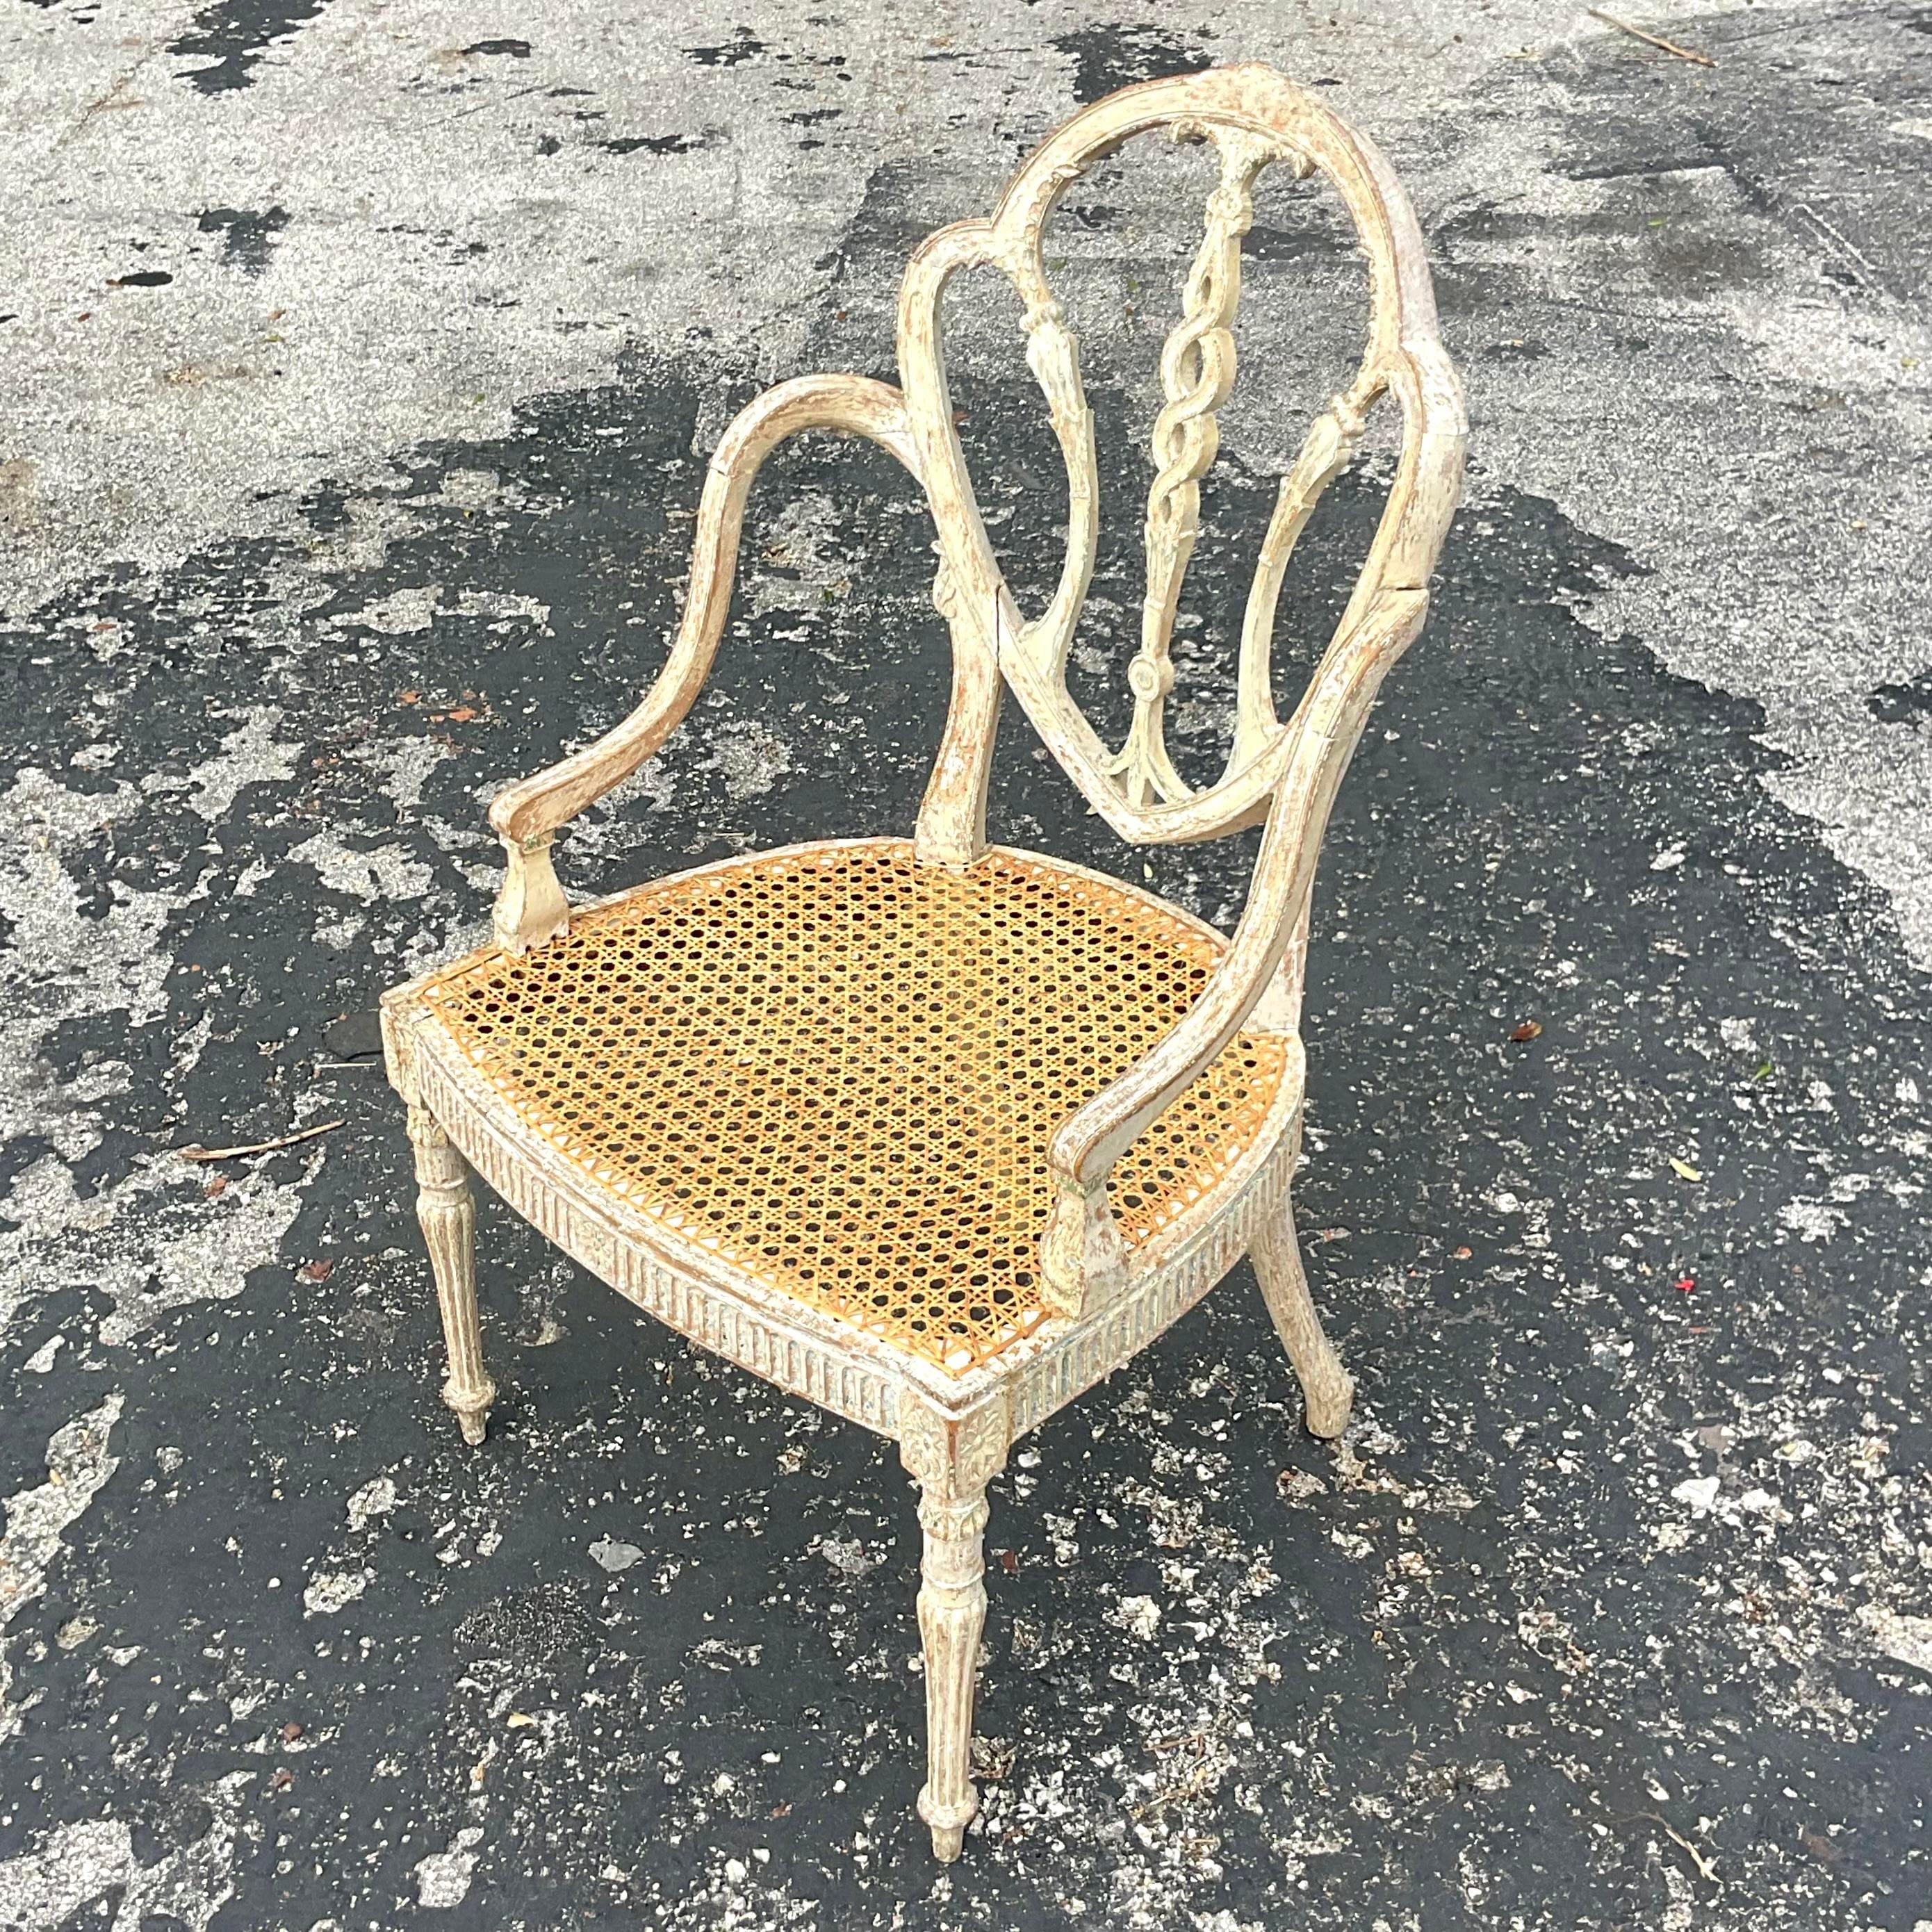 A magnificent vintage Regency arm chair. A beautiful hand carved frame with an incredible patina from time. Hand woven cane seating looped into the frame. This chair is breathtaking, but it’s an older chair with a delicate seat. It will be the most